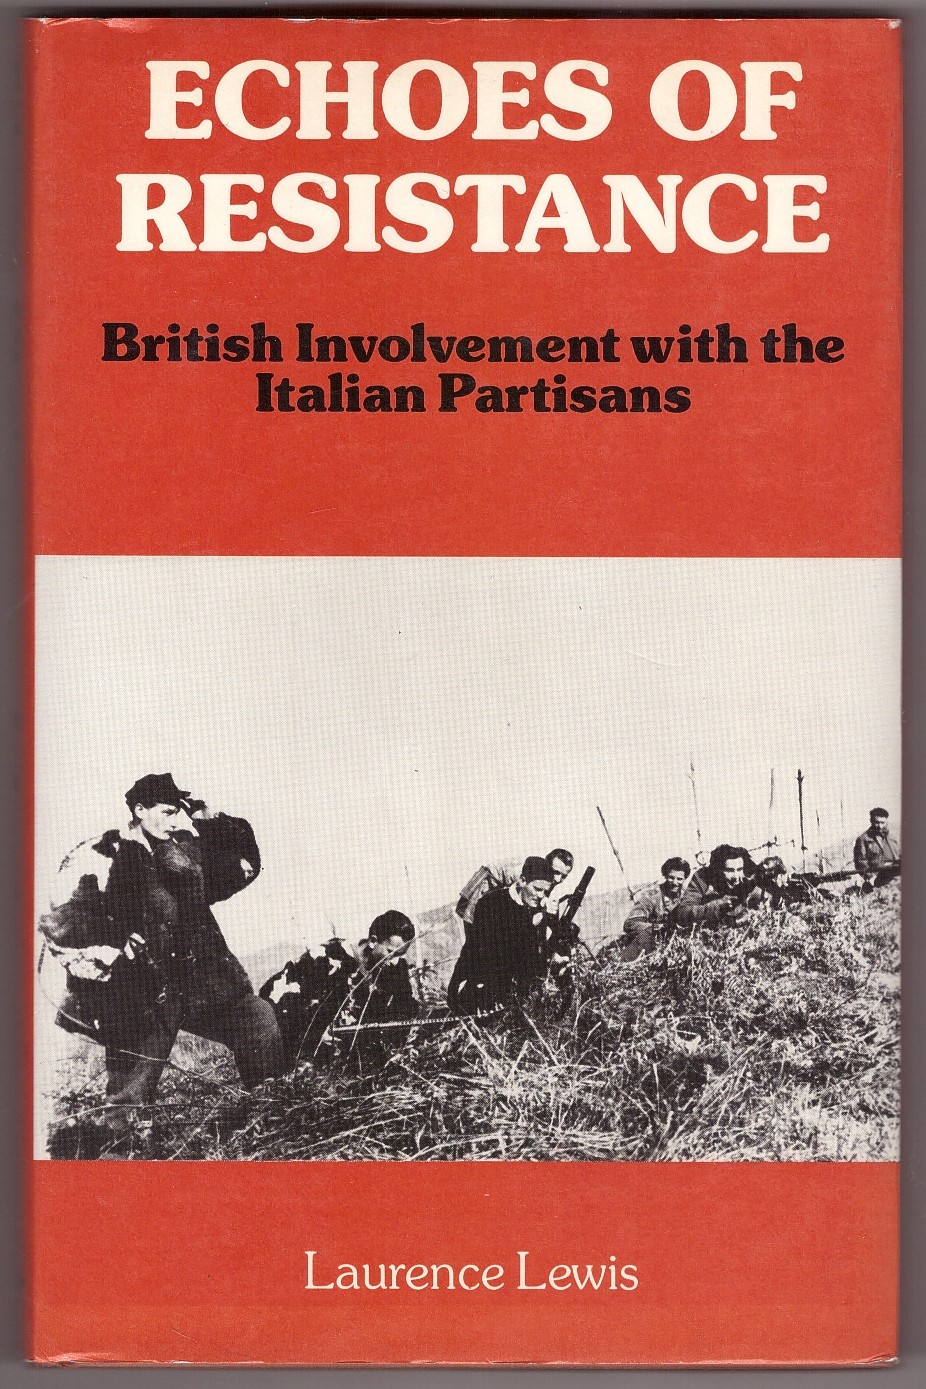 LEWIS, LAURENCE - Echoes of Resistance British Involvement with the Italian Partisans